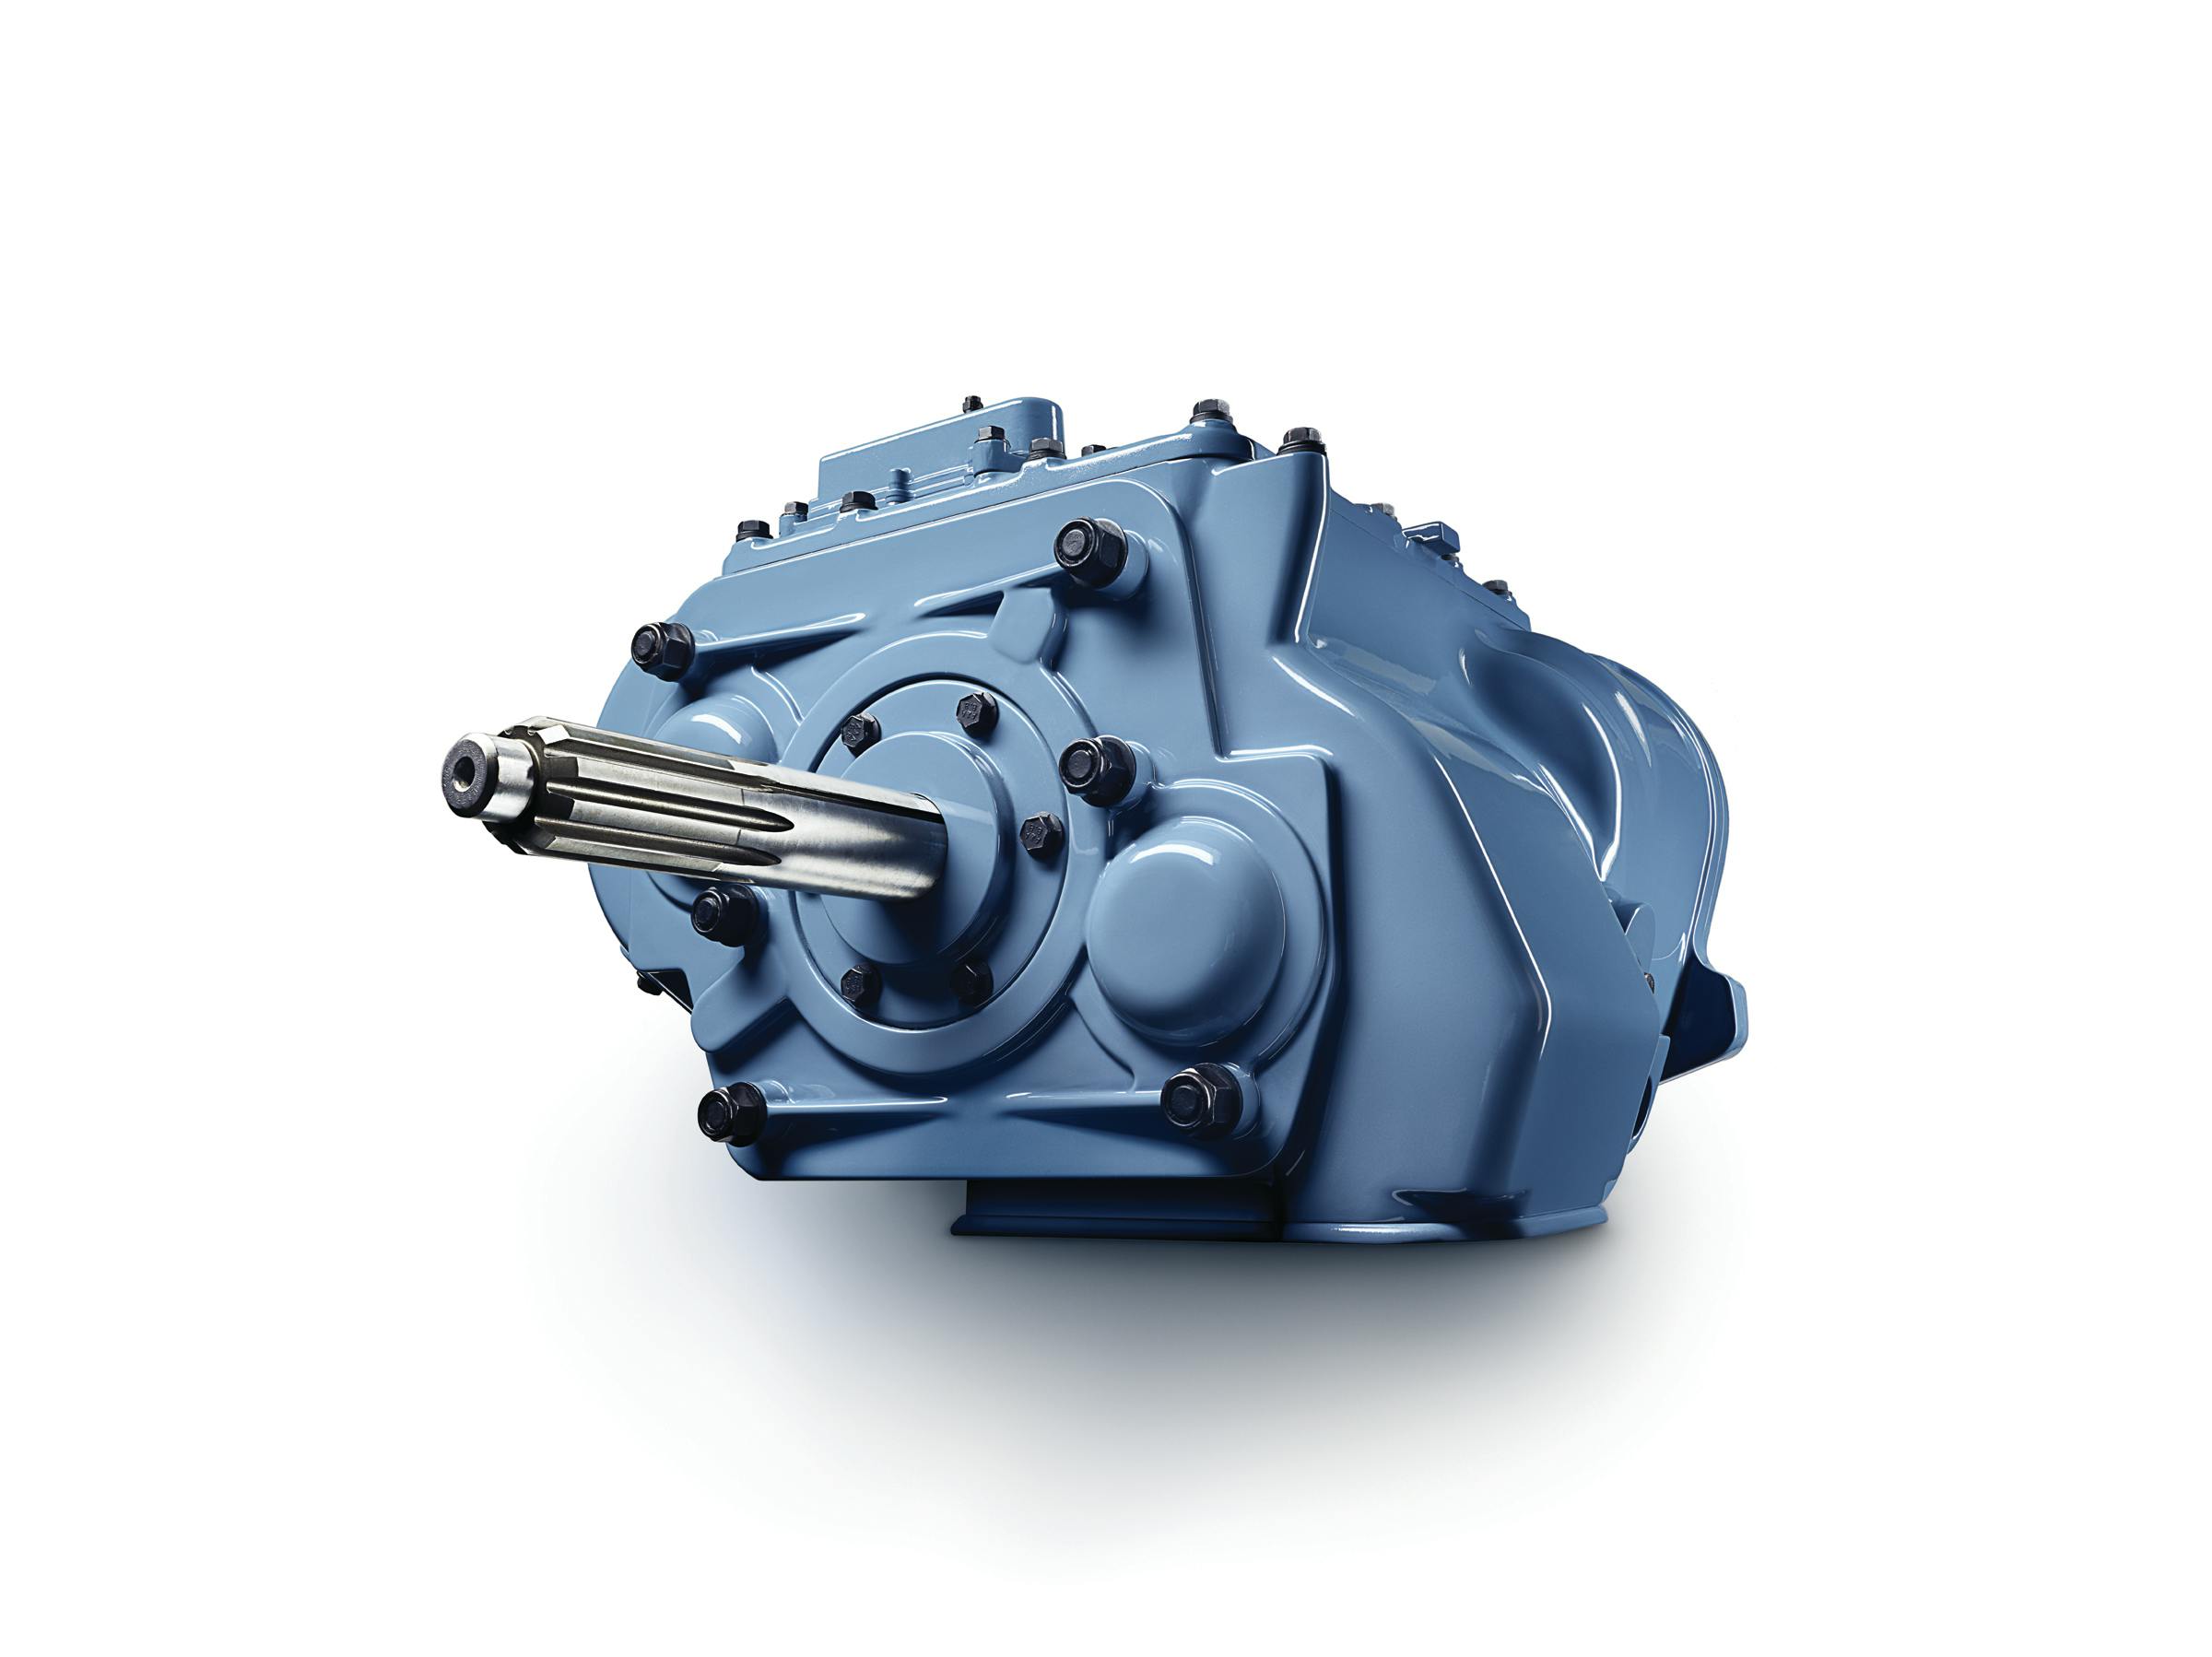 Eaton Now Offers Flex Reman Transmissions in Canada | Construction News